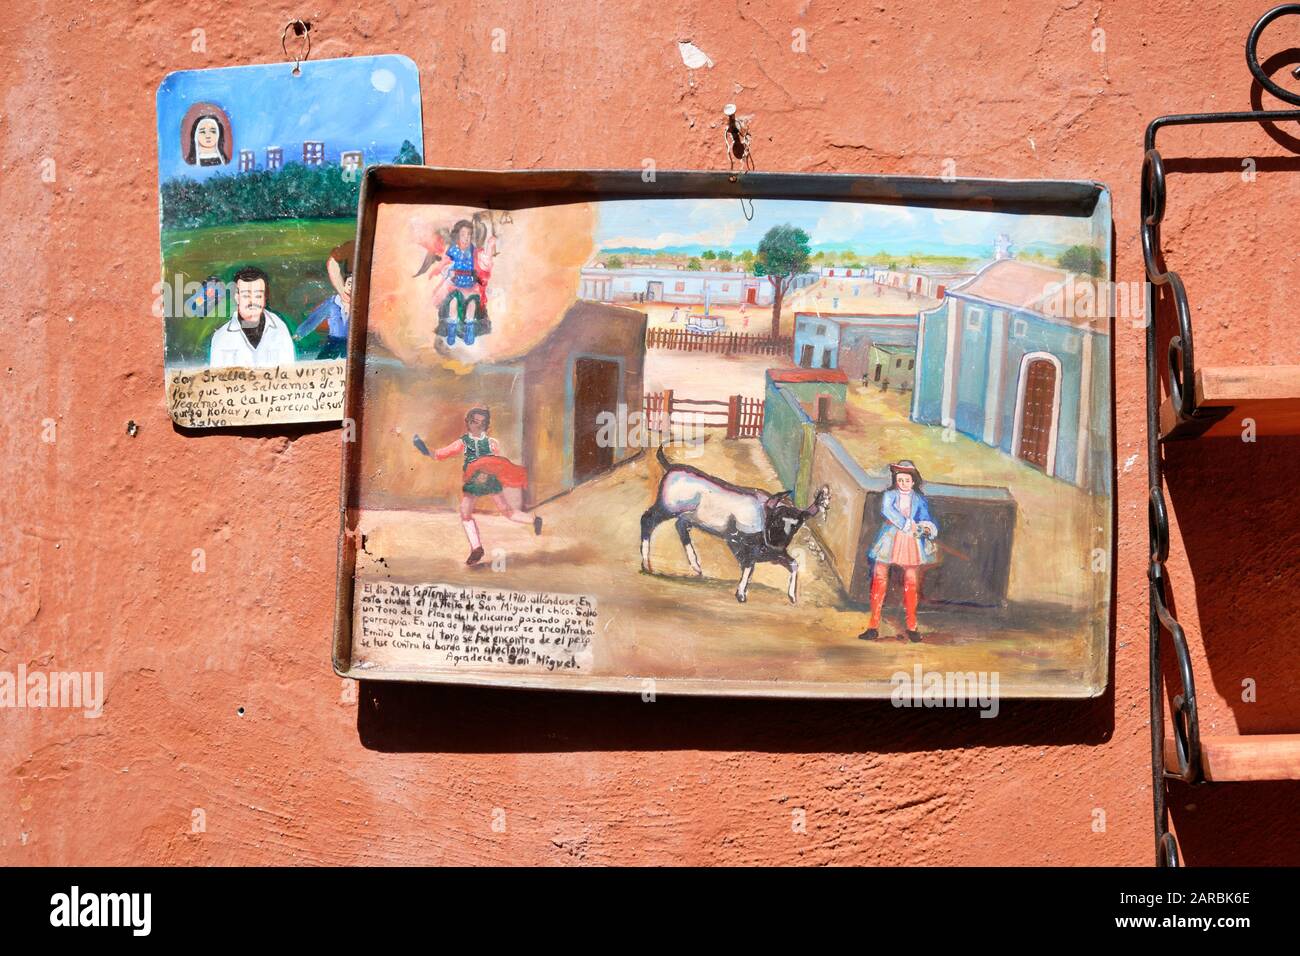 Mexican Naive art folk painting depicting 18th century rural scene, on Metal trays hanging on wall outside Stock Photo